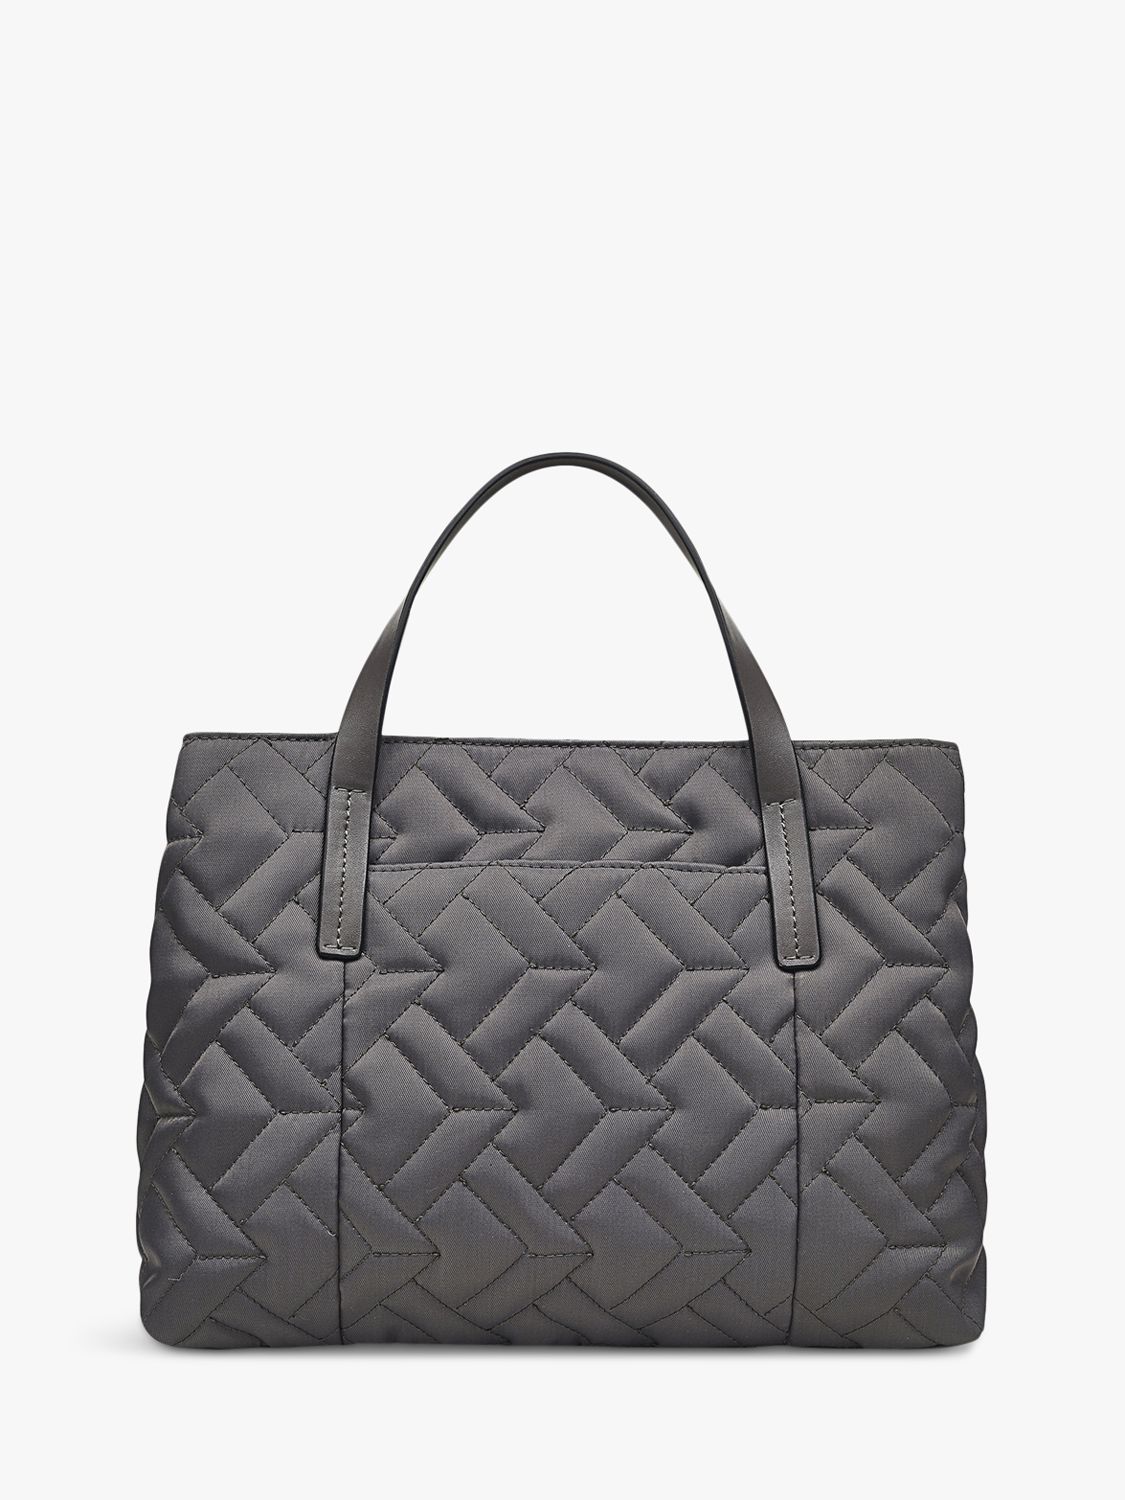 Radley Finsbury Park Quilted Grab Bag, Charcoal at John Lewis & Partners